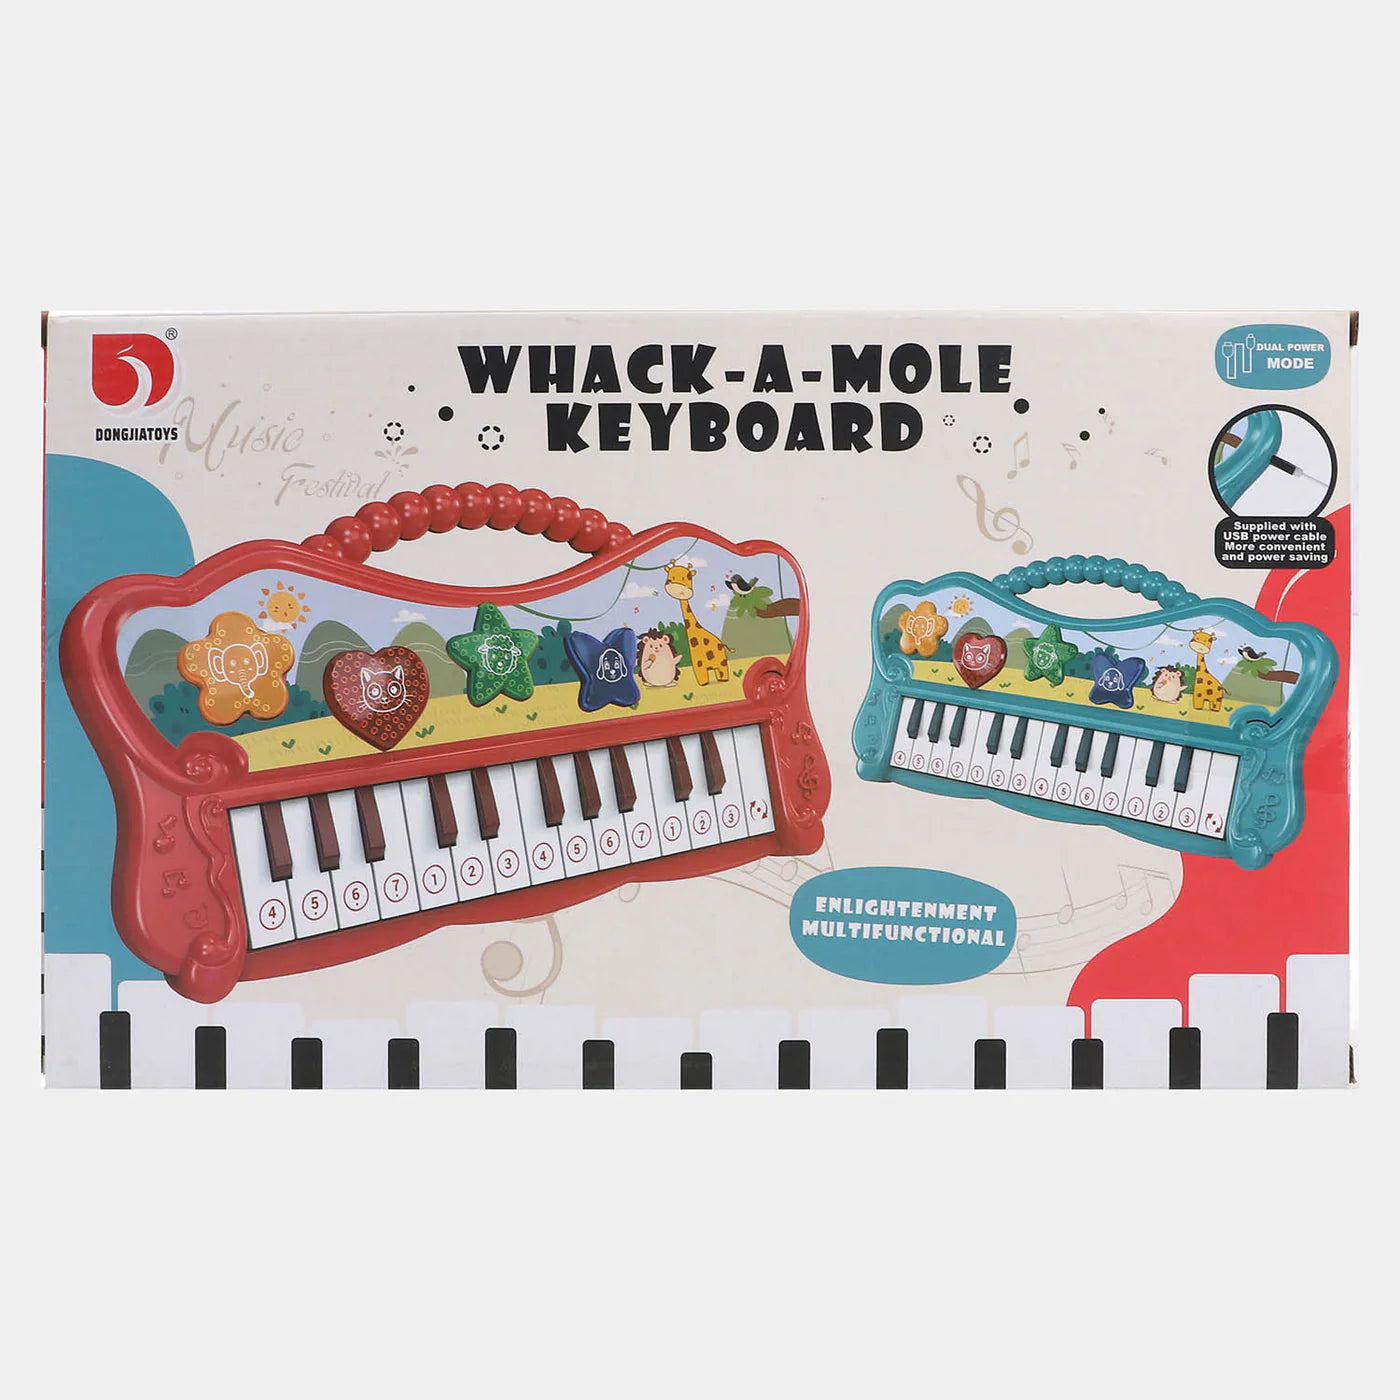 WHACK-A-MOLE KEYBOARD/PIANO FOR KIDS - Red